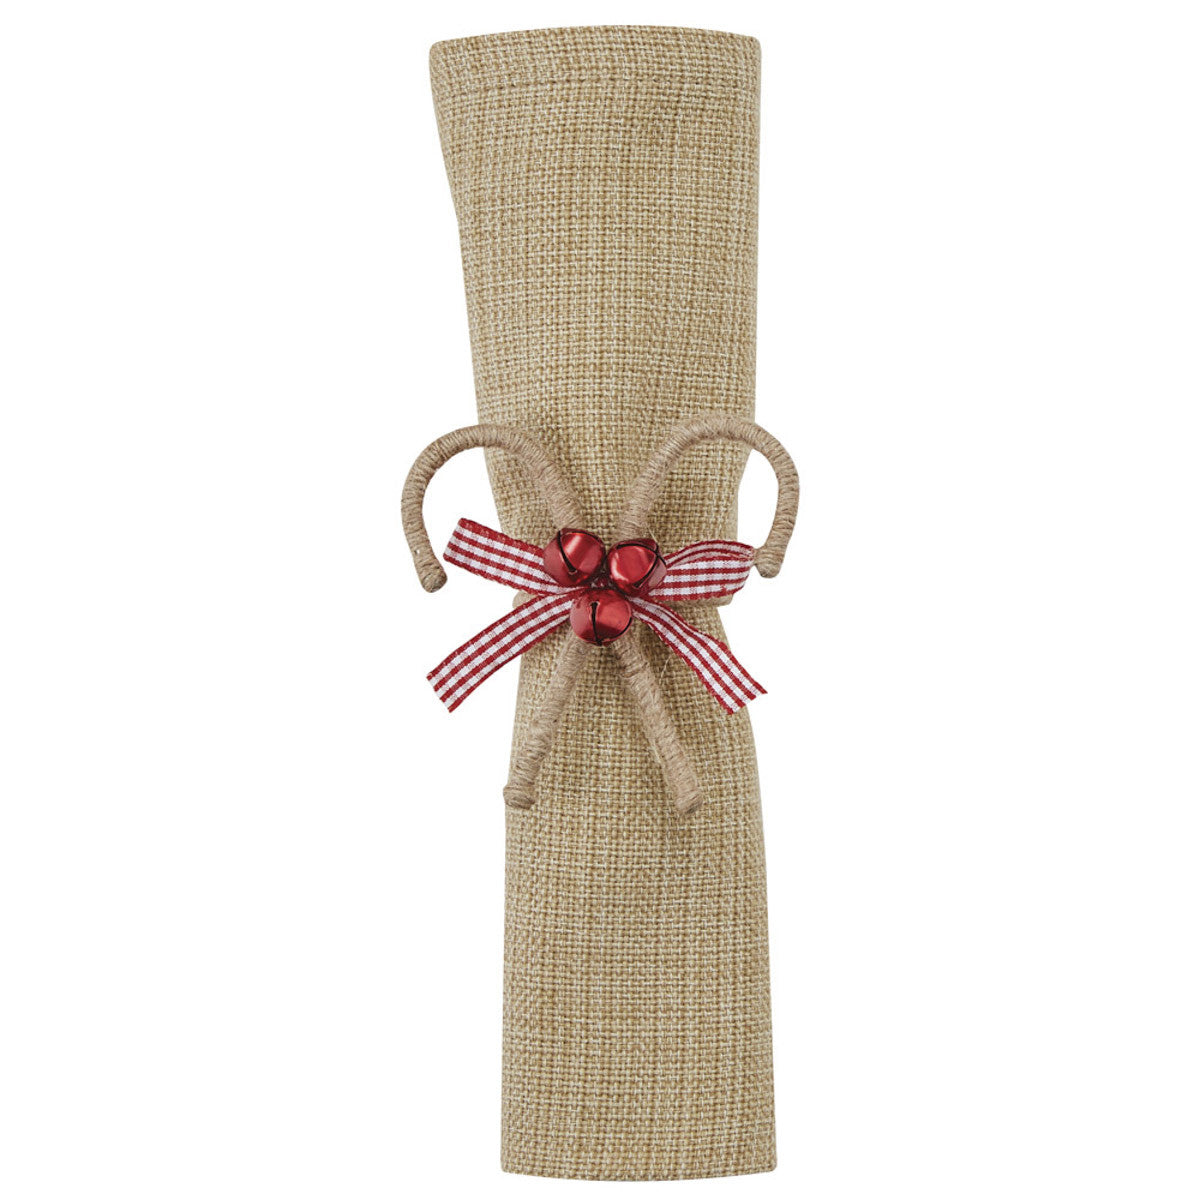 Candy Cane Napkin Rings - Set of 6